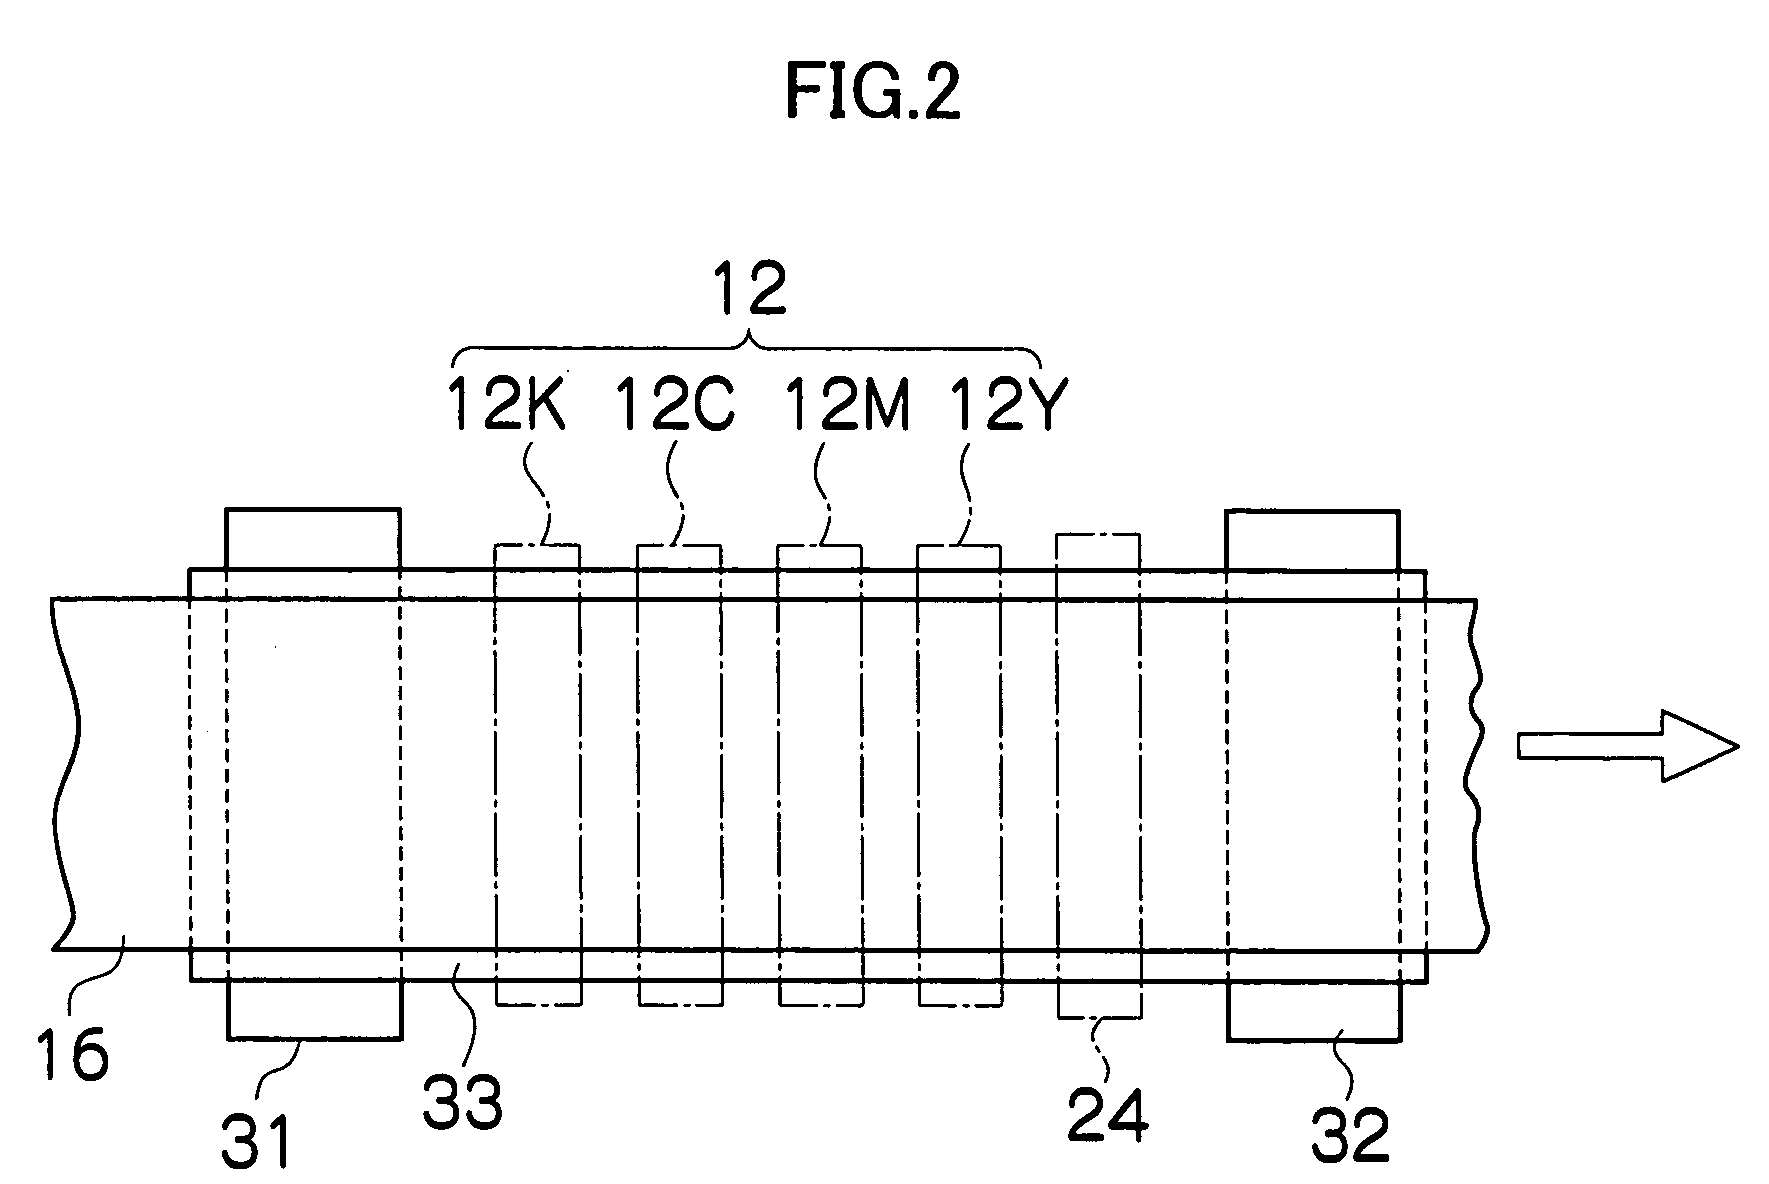 Image recording apparatus and method for determining defective image-recording elements